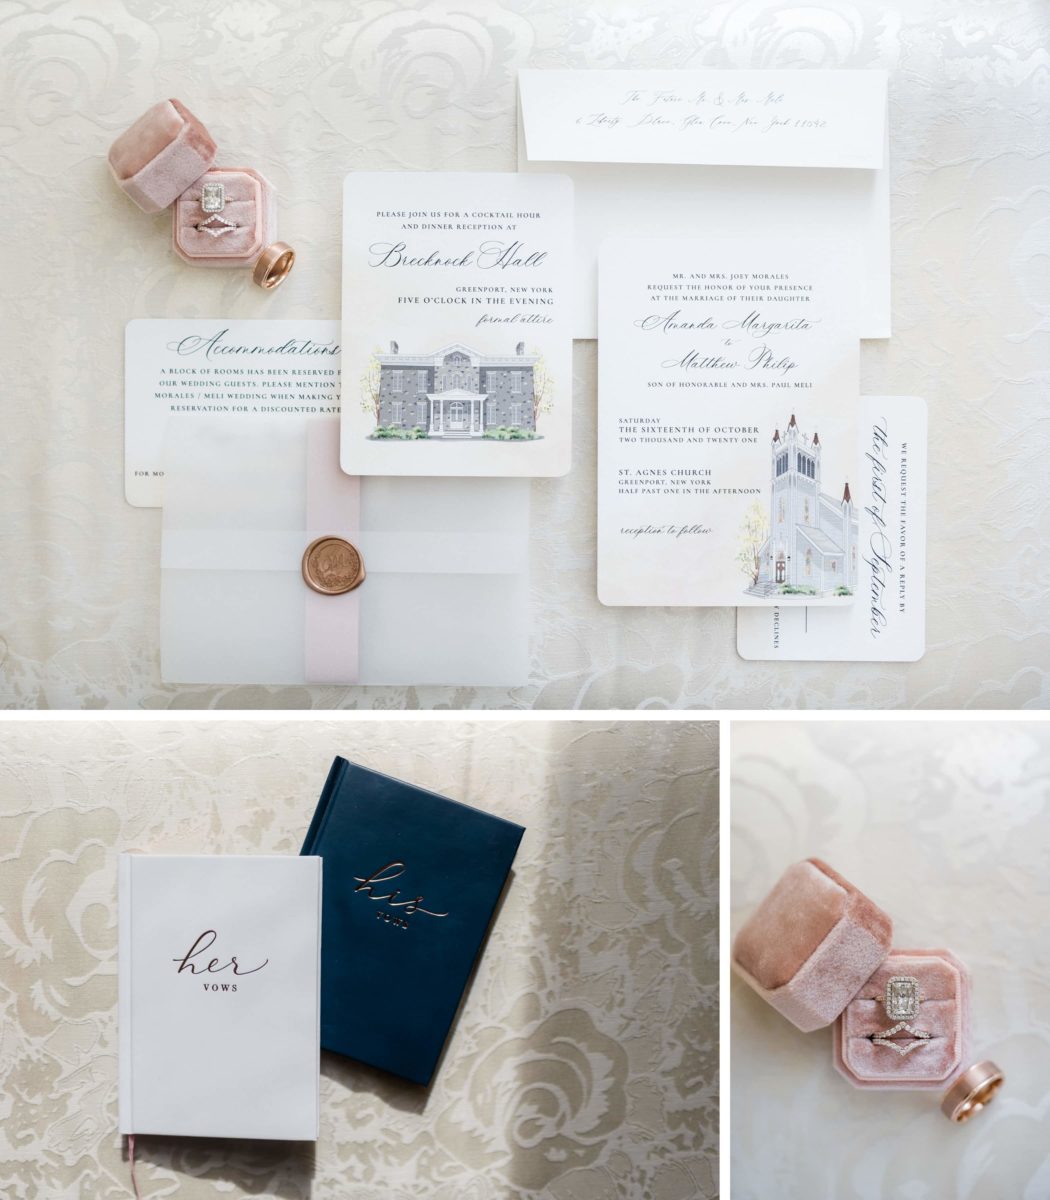 Invitation suite, vows and rings photos